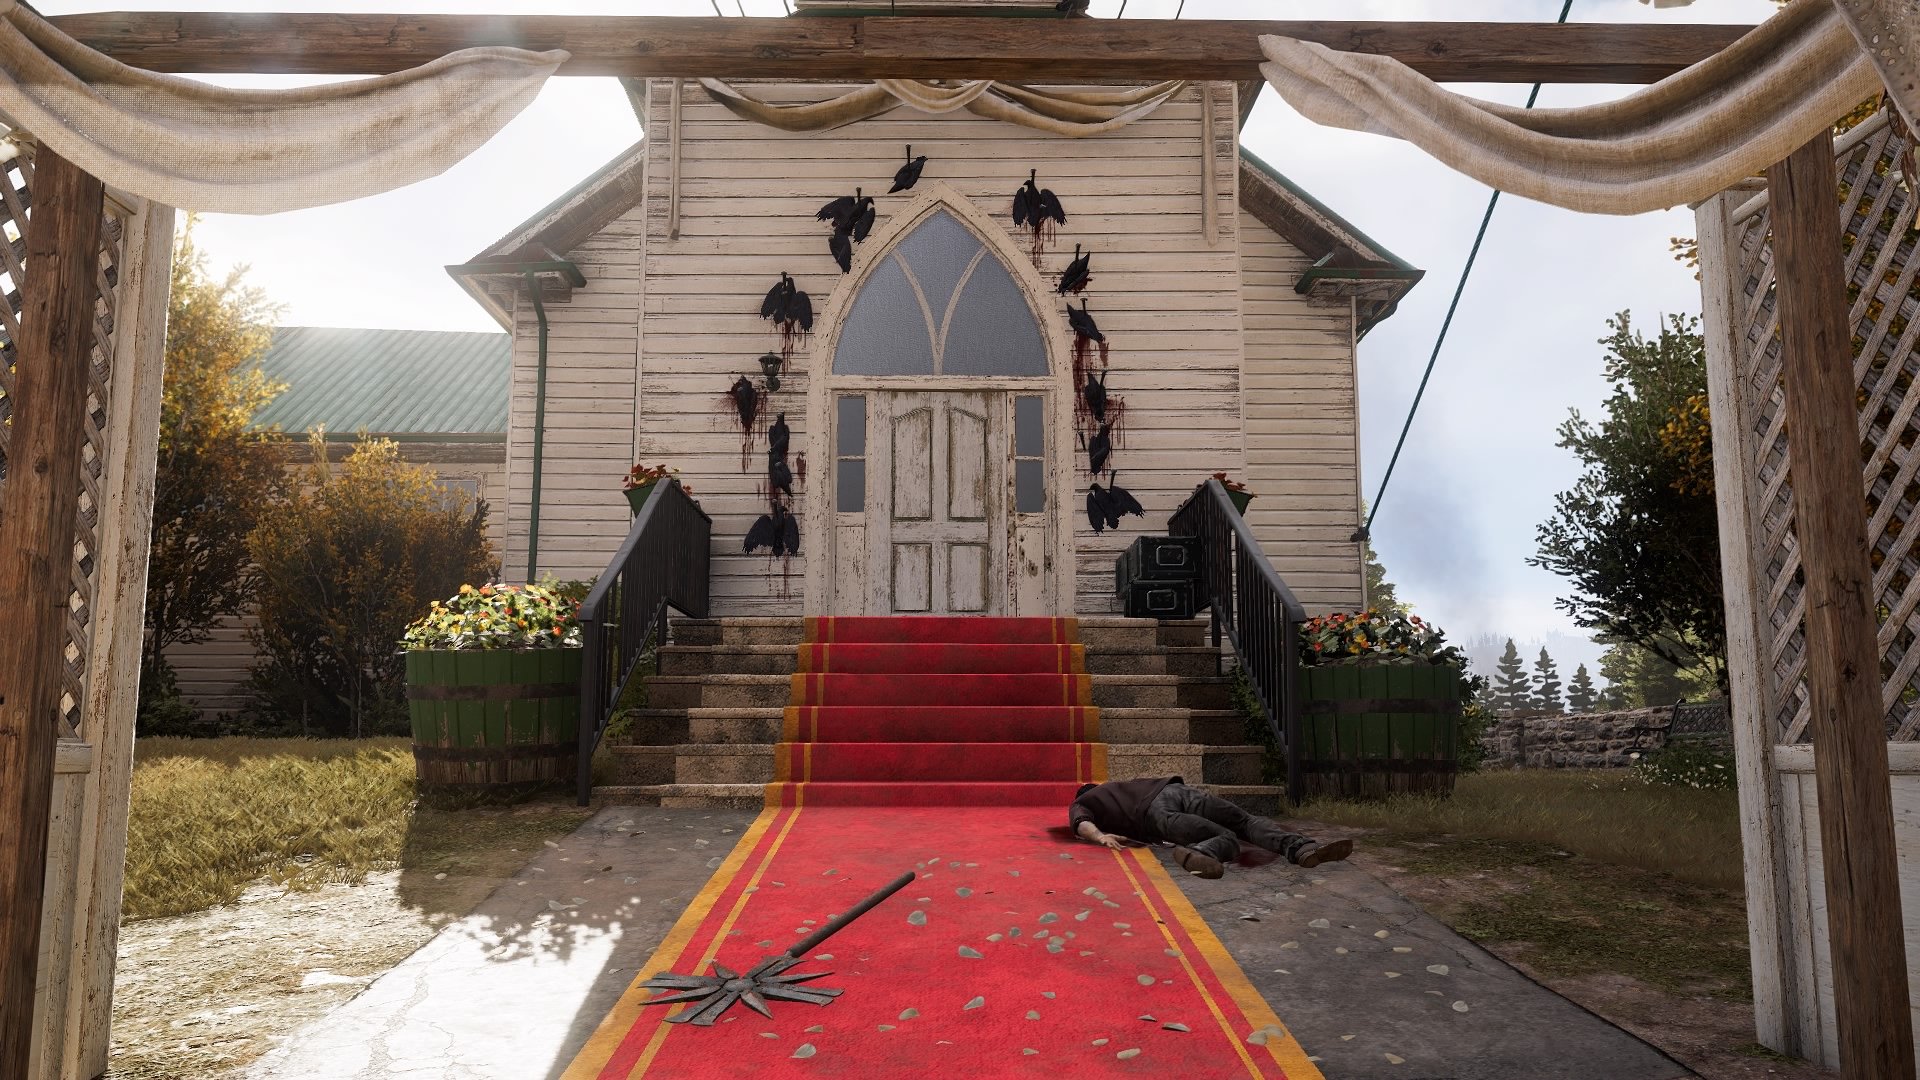 This is why Far Cry 5 looks almost as good as a film on Xbox One X